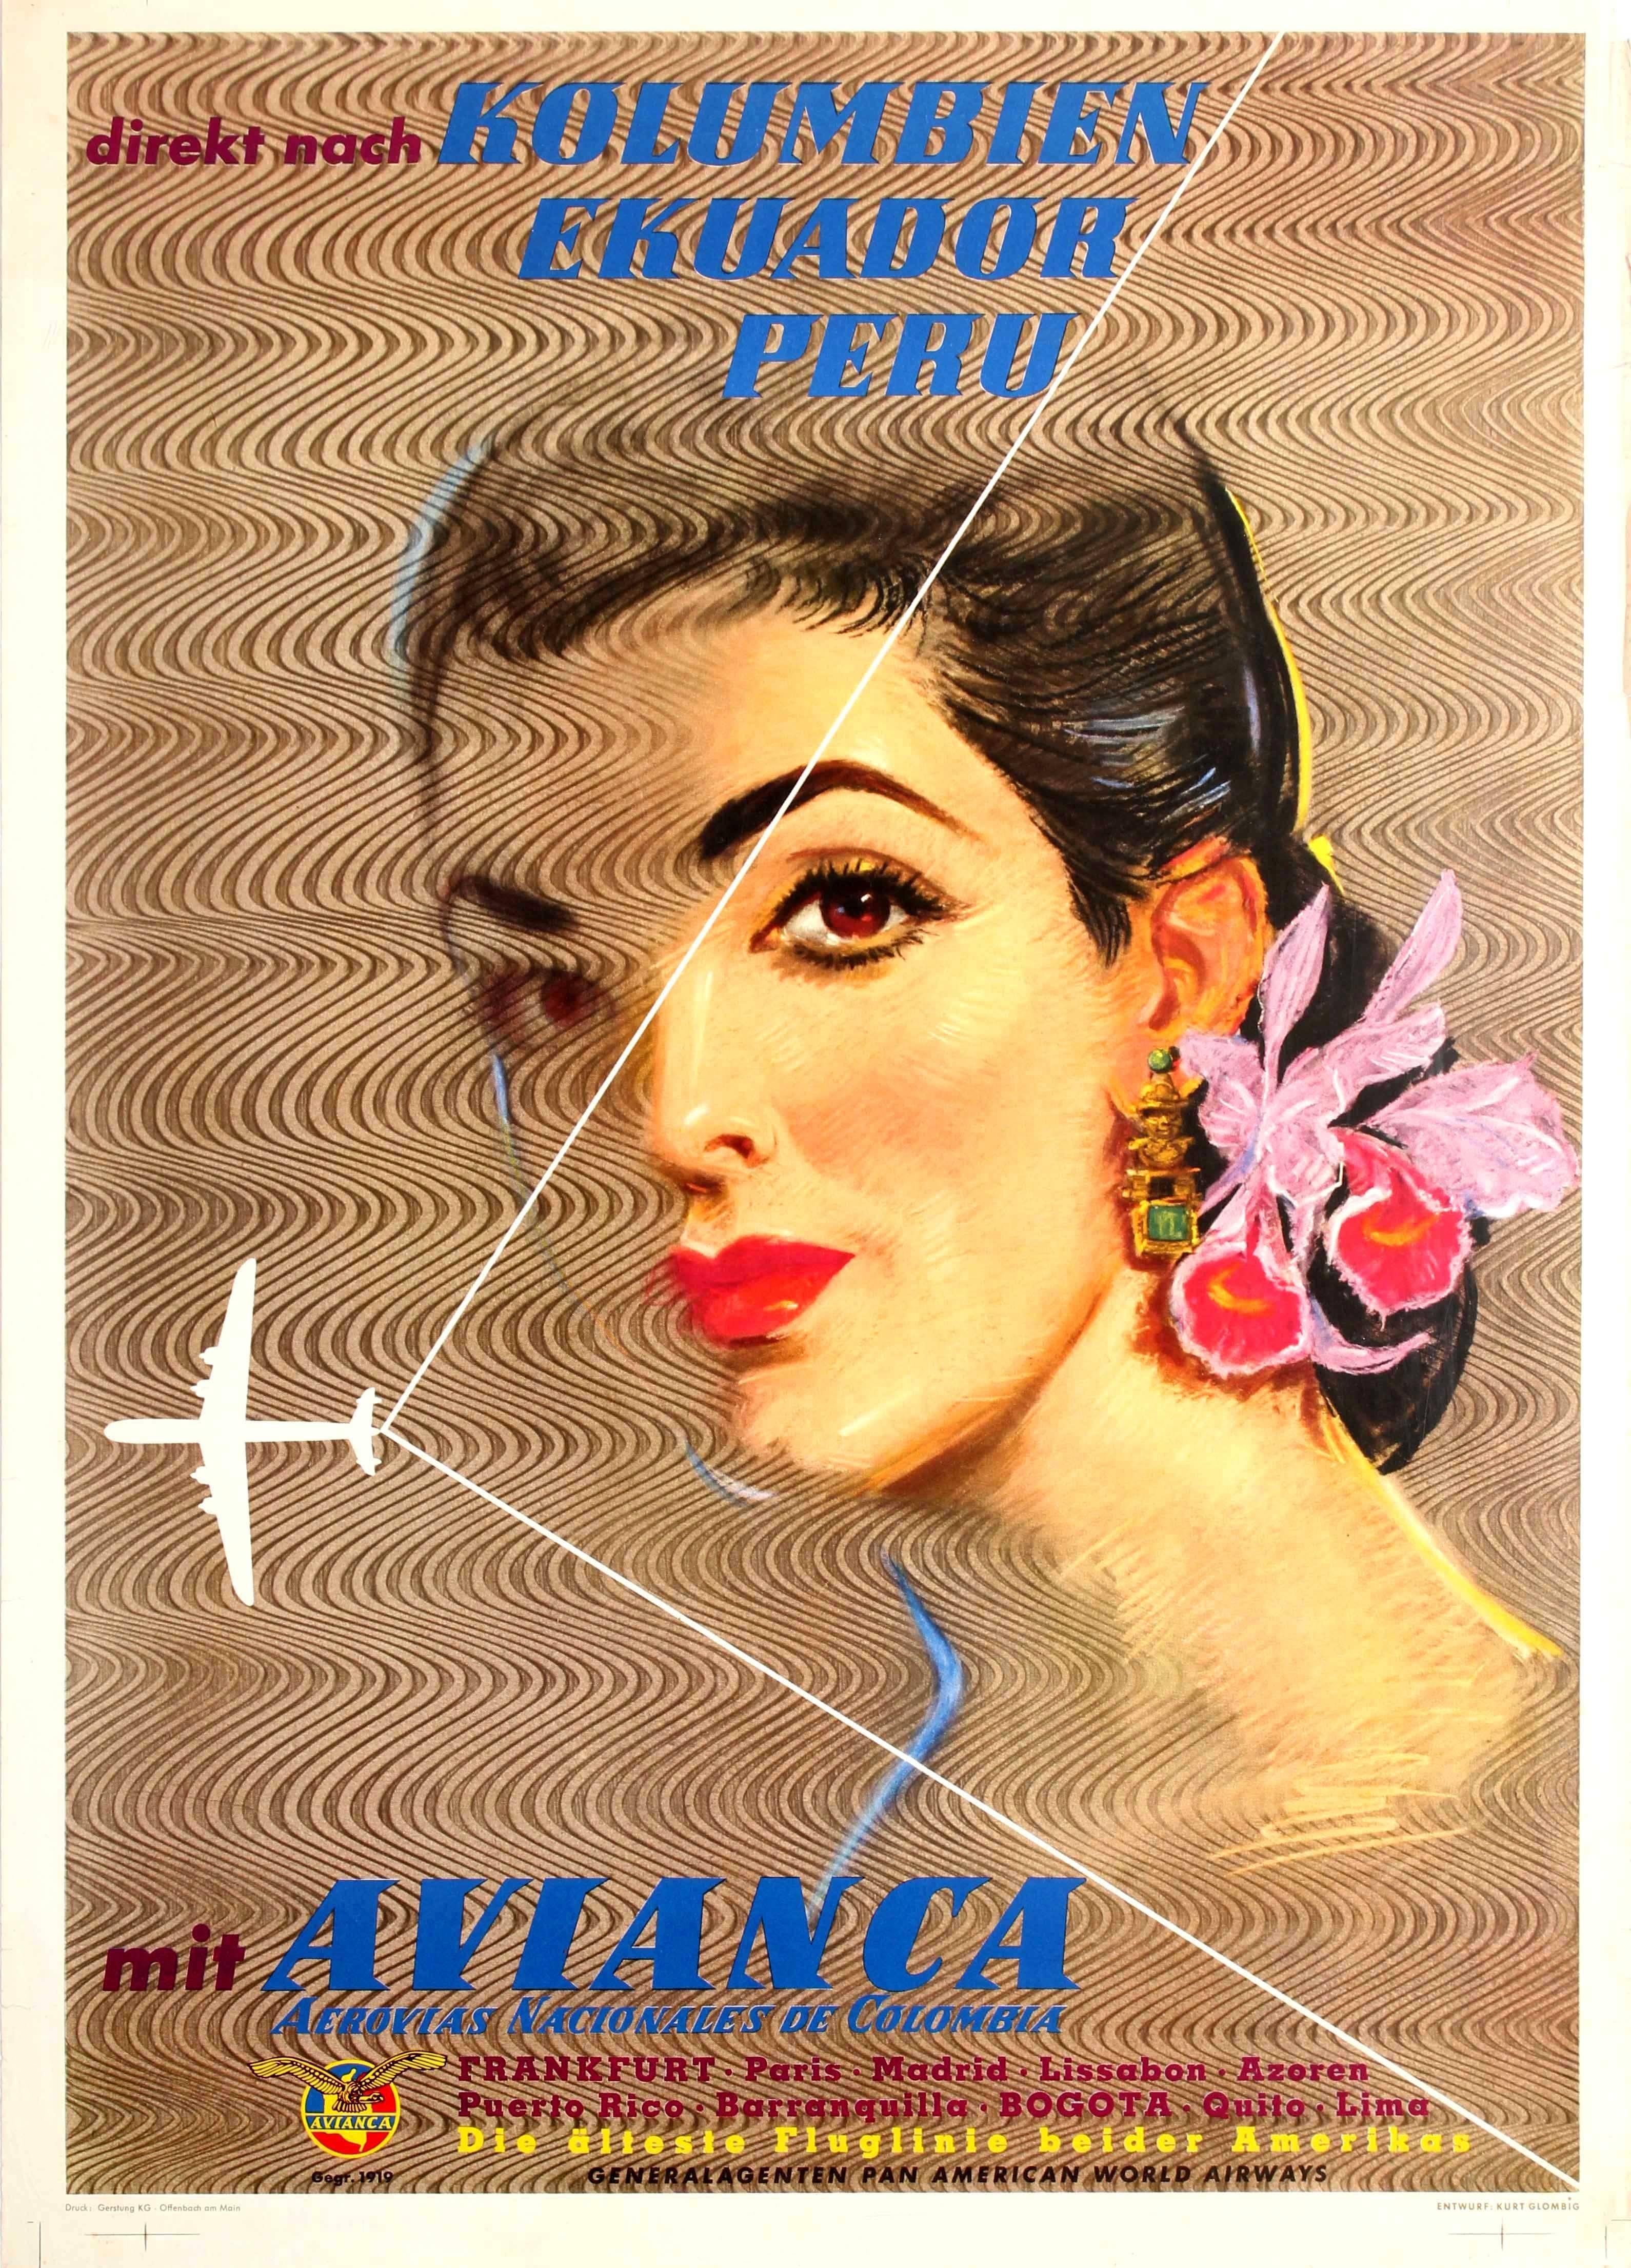 Kurt Glombig Print - Original Vintage Airline Poster For Colombia Ecuador Peru By Avianca And Pan Am